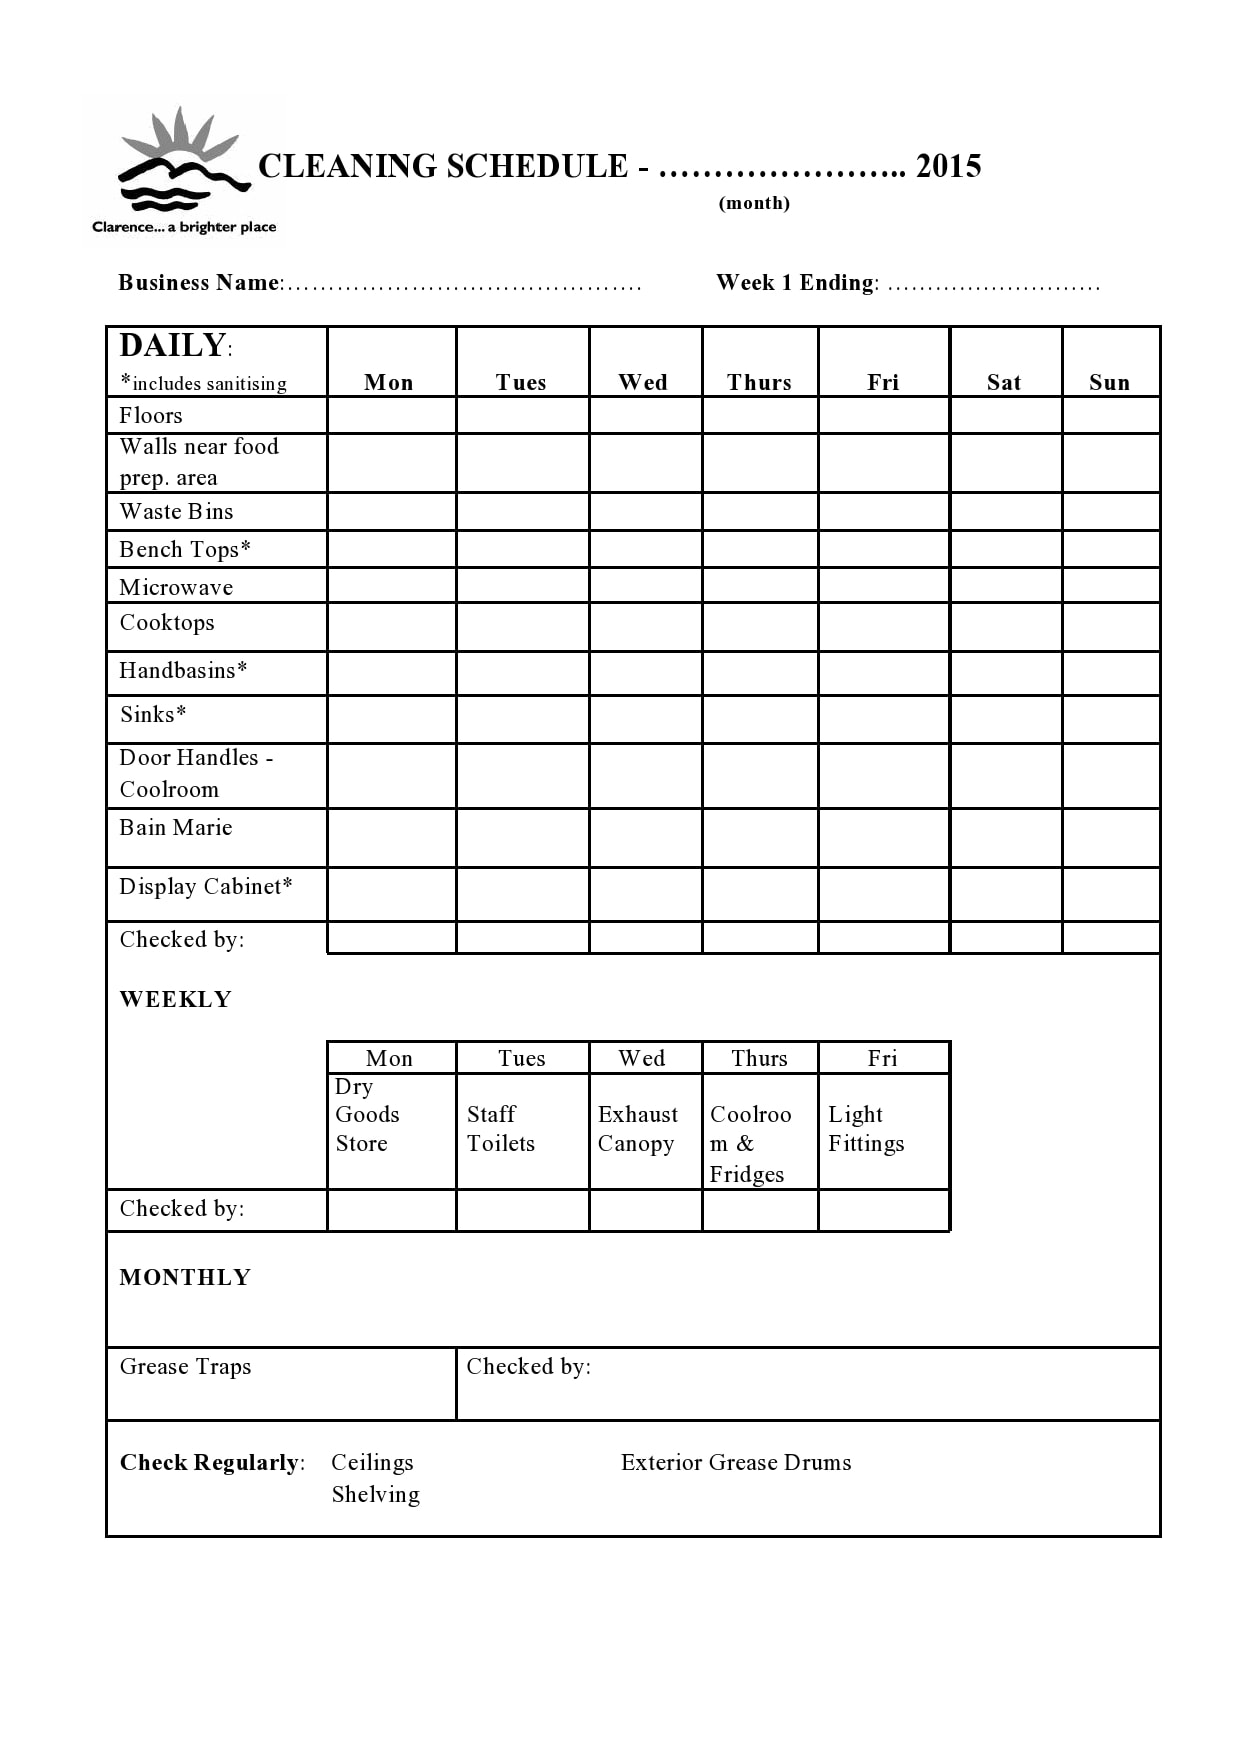 house cleaning schedule daily weekly monthly pdf